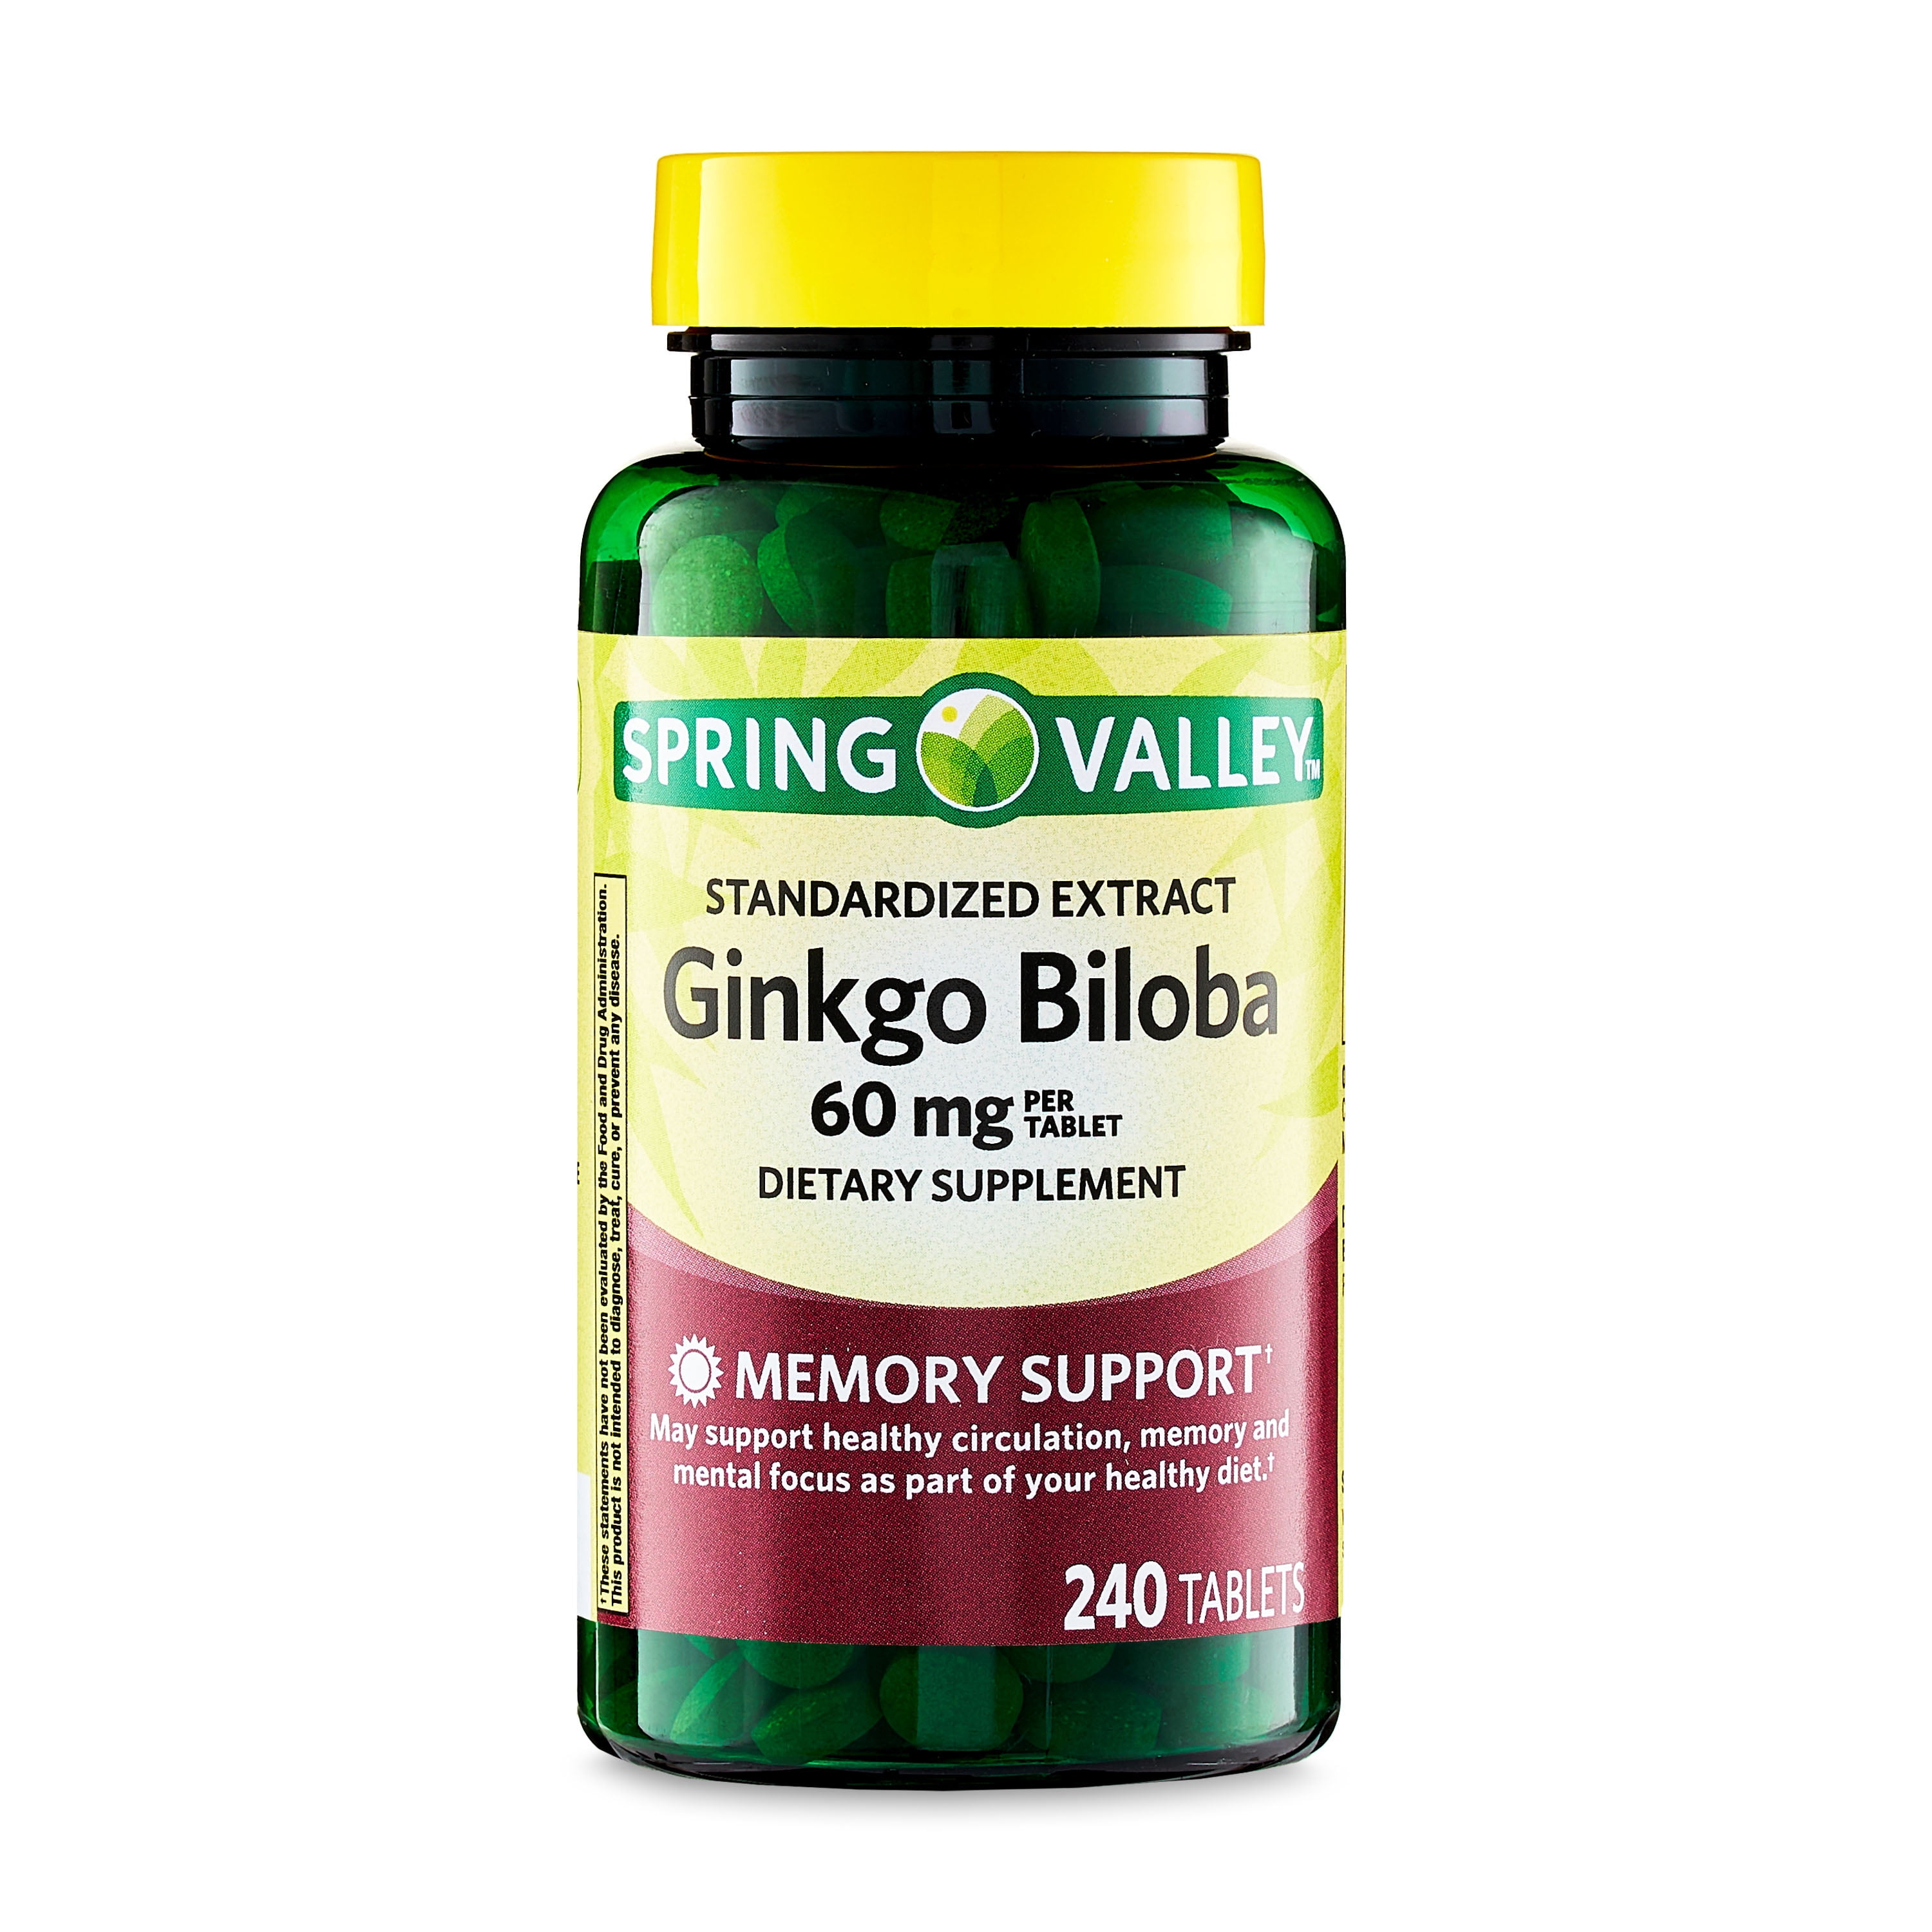 Spring Valley Standardized Extract Ginkgo Biloba Dietary Supplement, 60 mg, 240 count